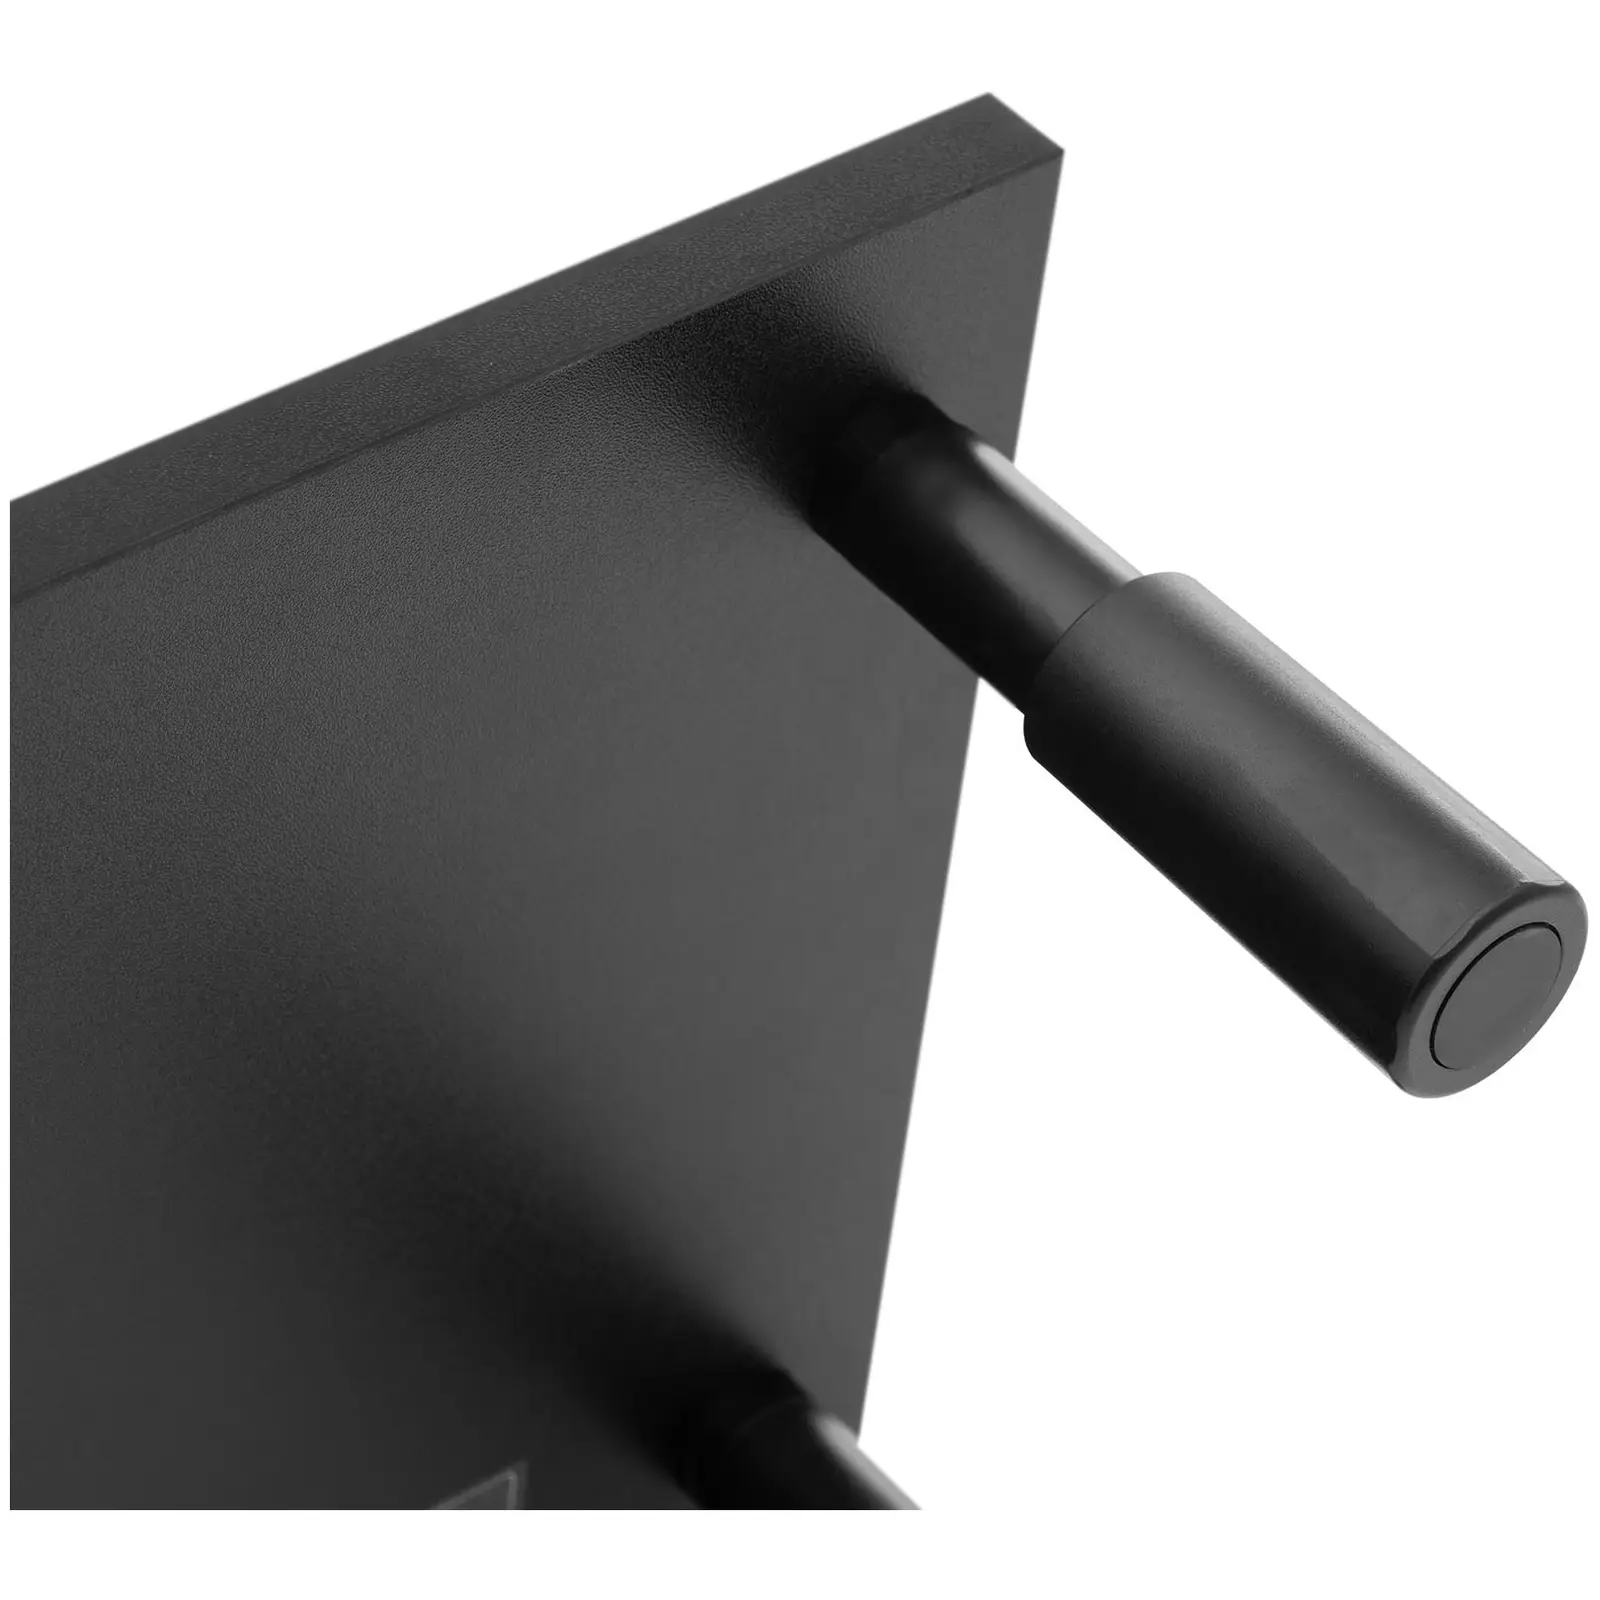 Laptop Stand - height adjustable 91 / 140 mm